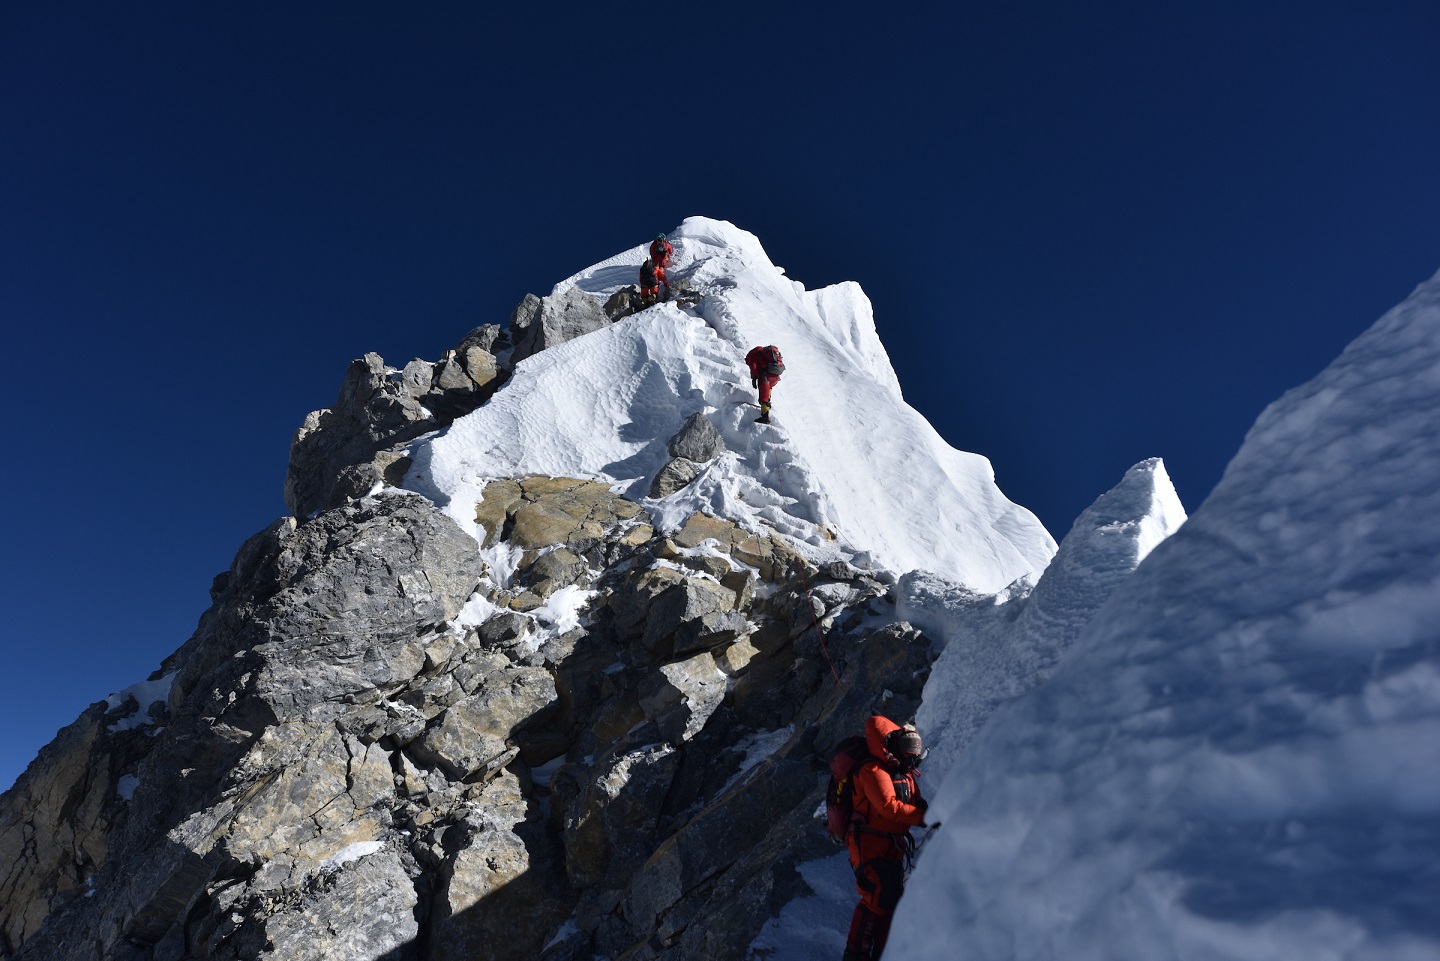 A photo of four climbers ascending a snowy mountain top in the Himalayas. Each climber is dressed in red down jackets and pants. The mountain is Mount Everest.